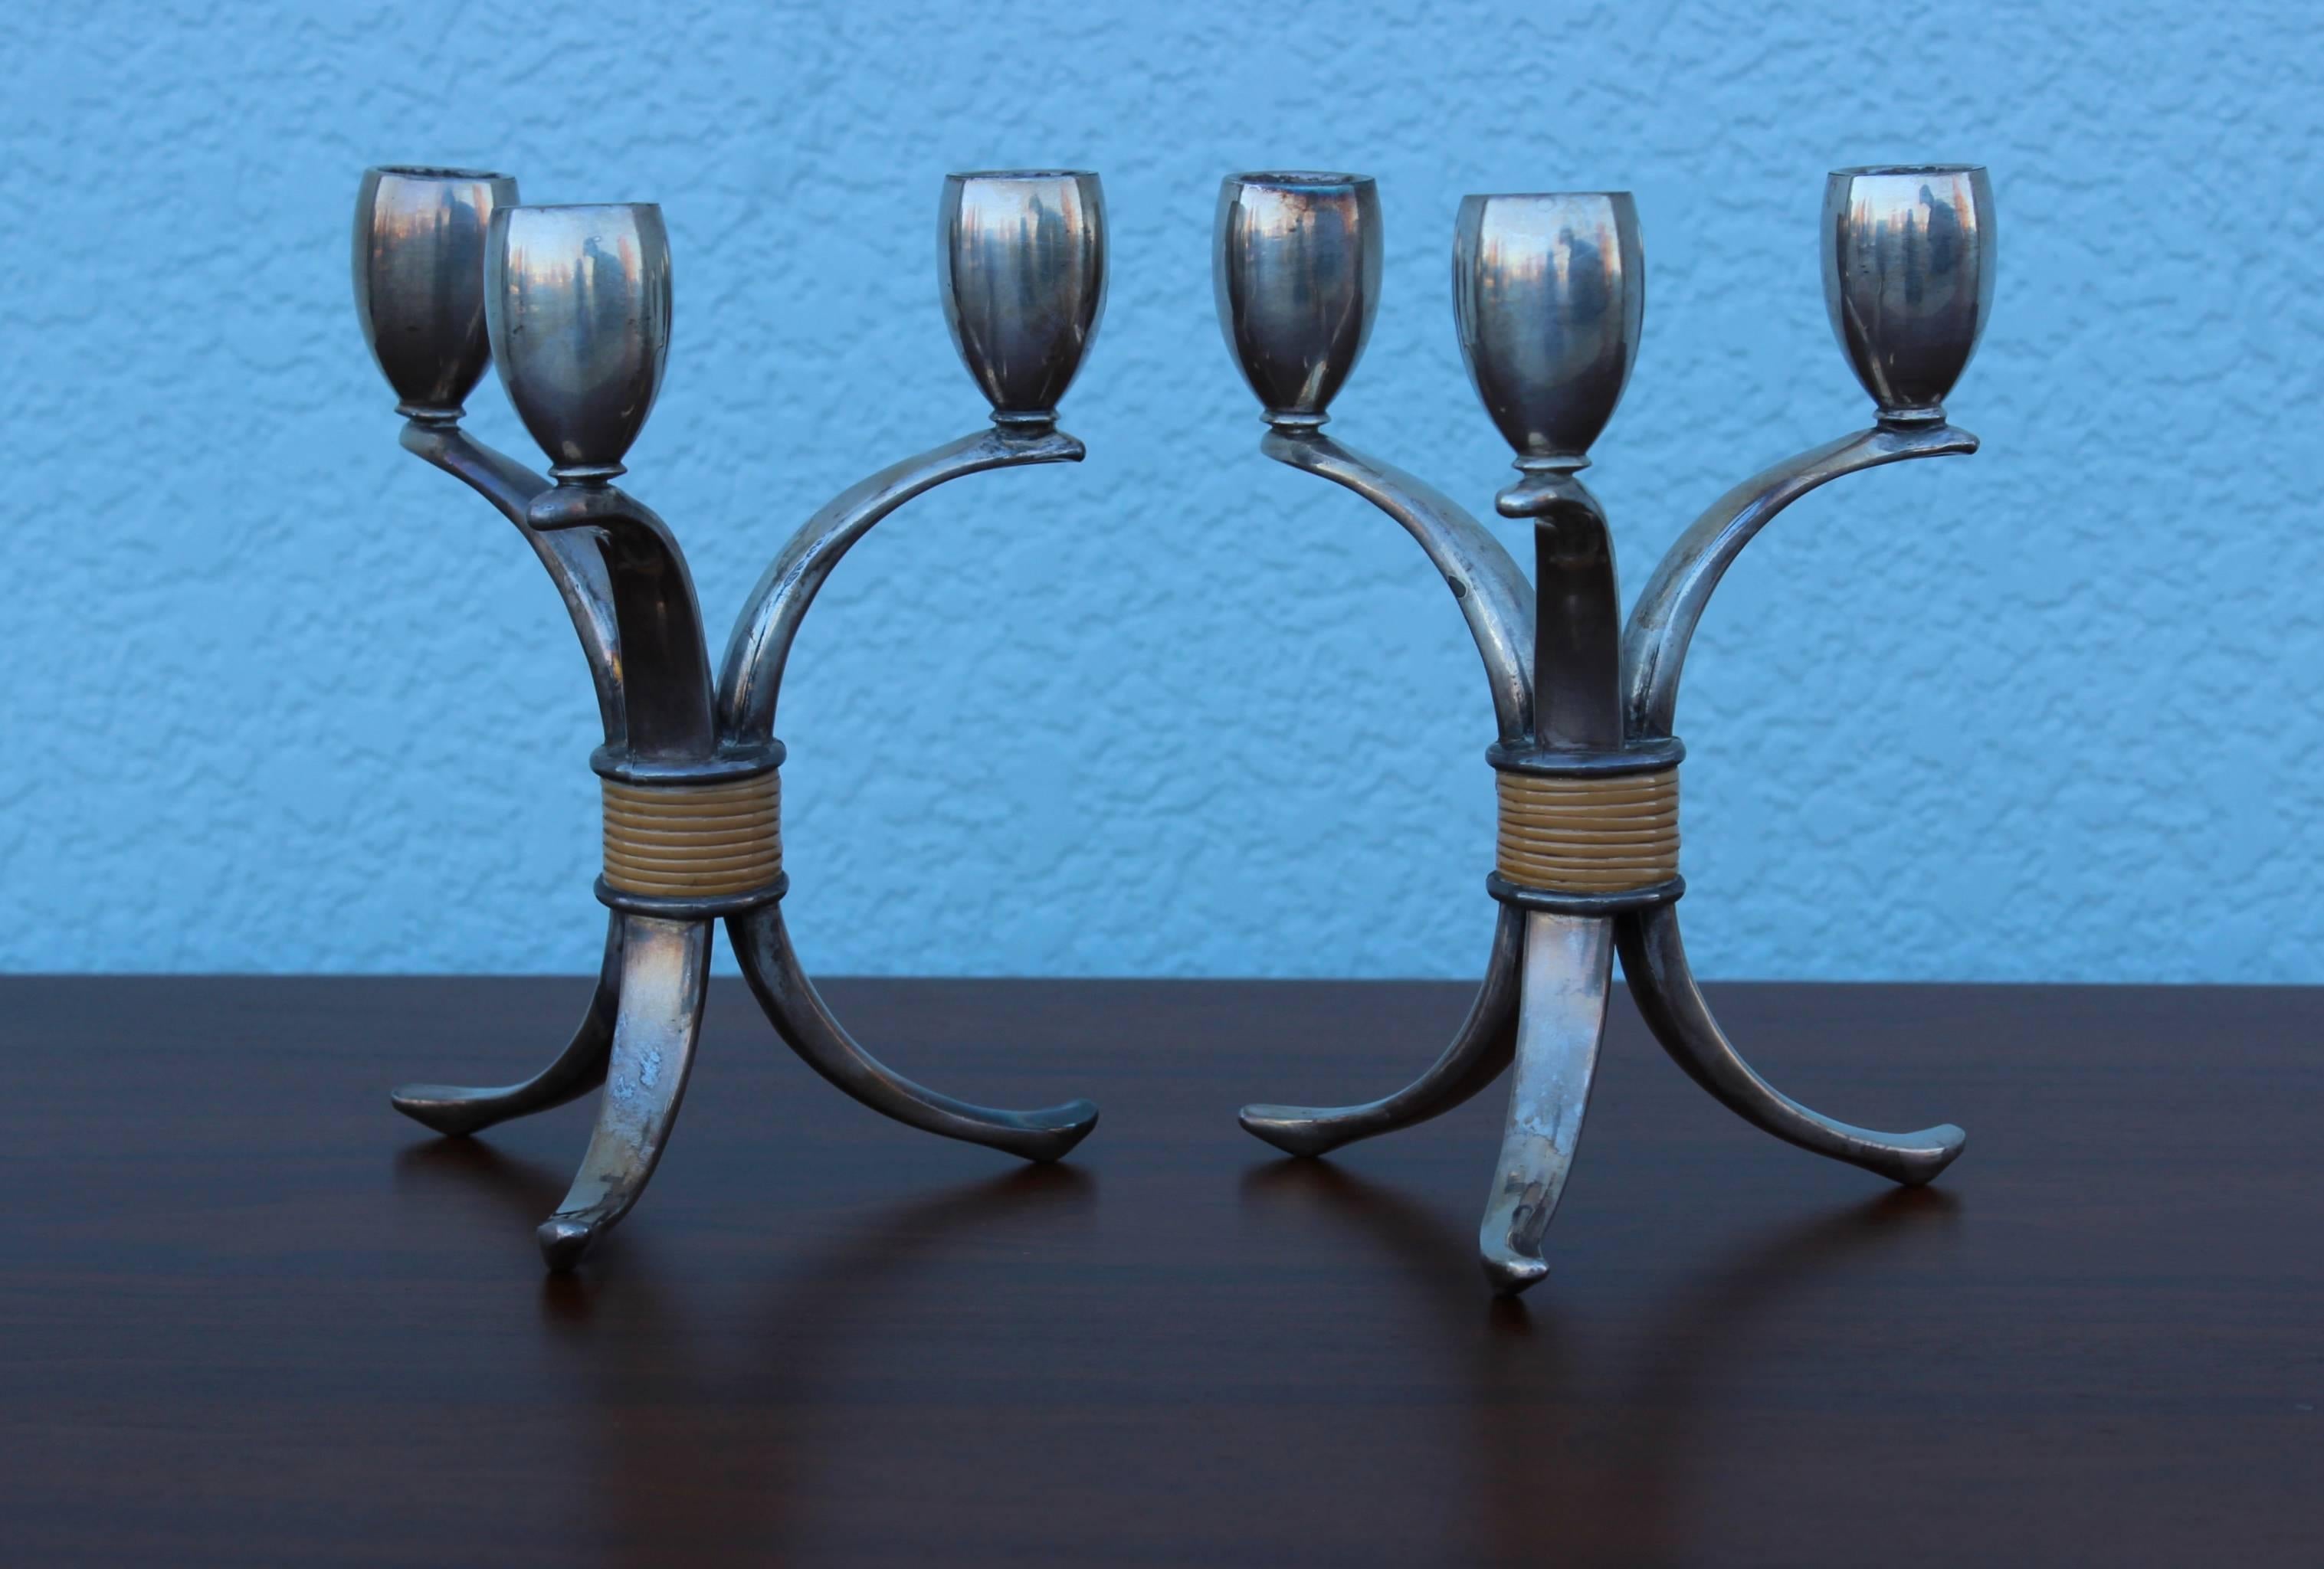 1950s, Rogers Bros silver plate tripod candlesticks from the 